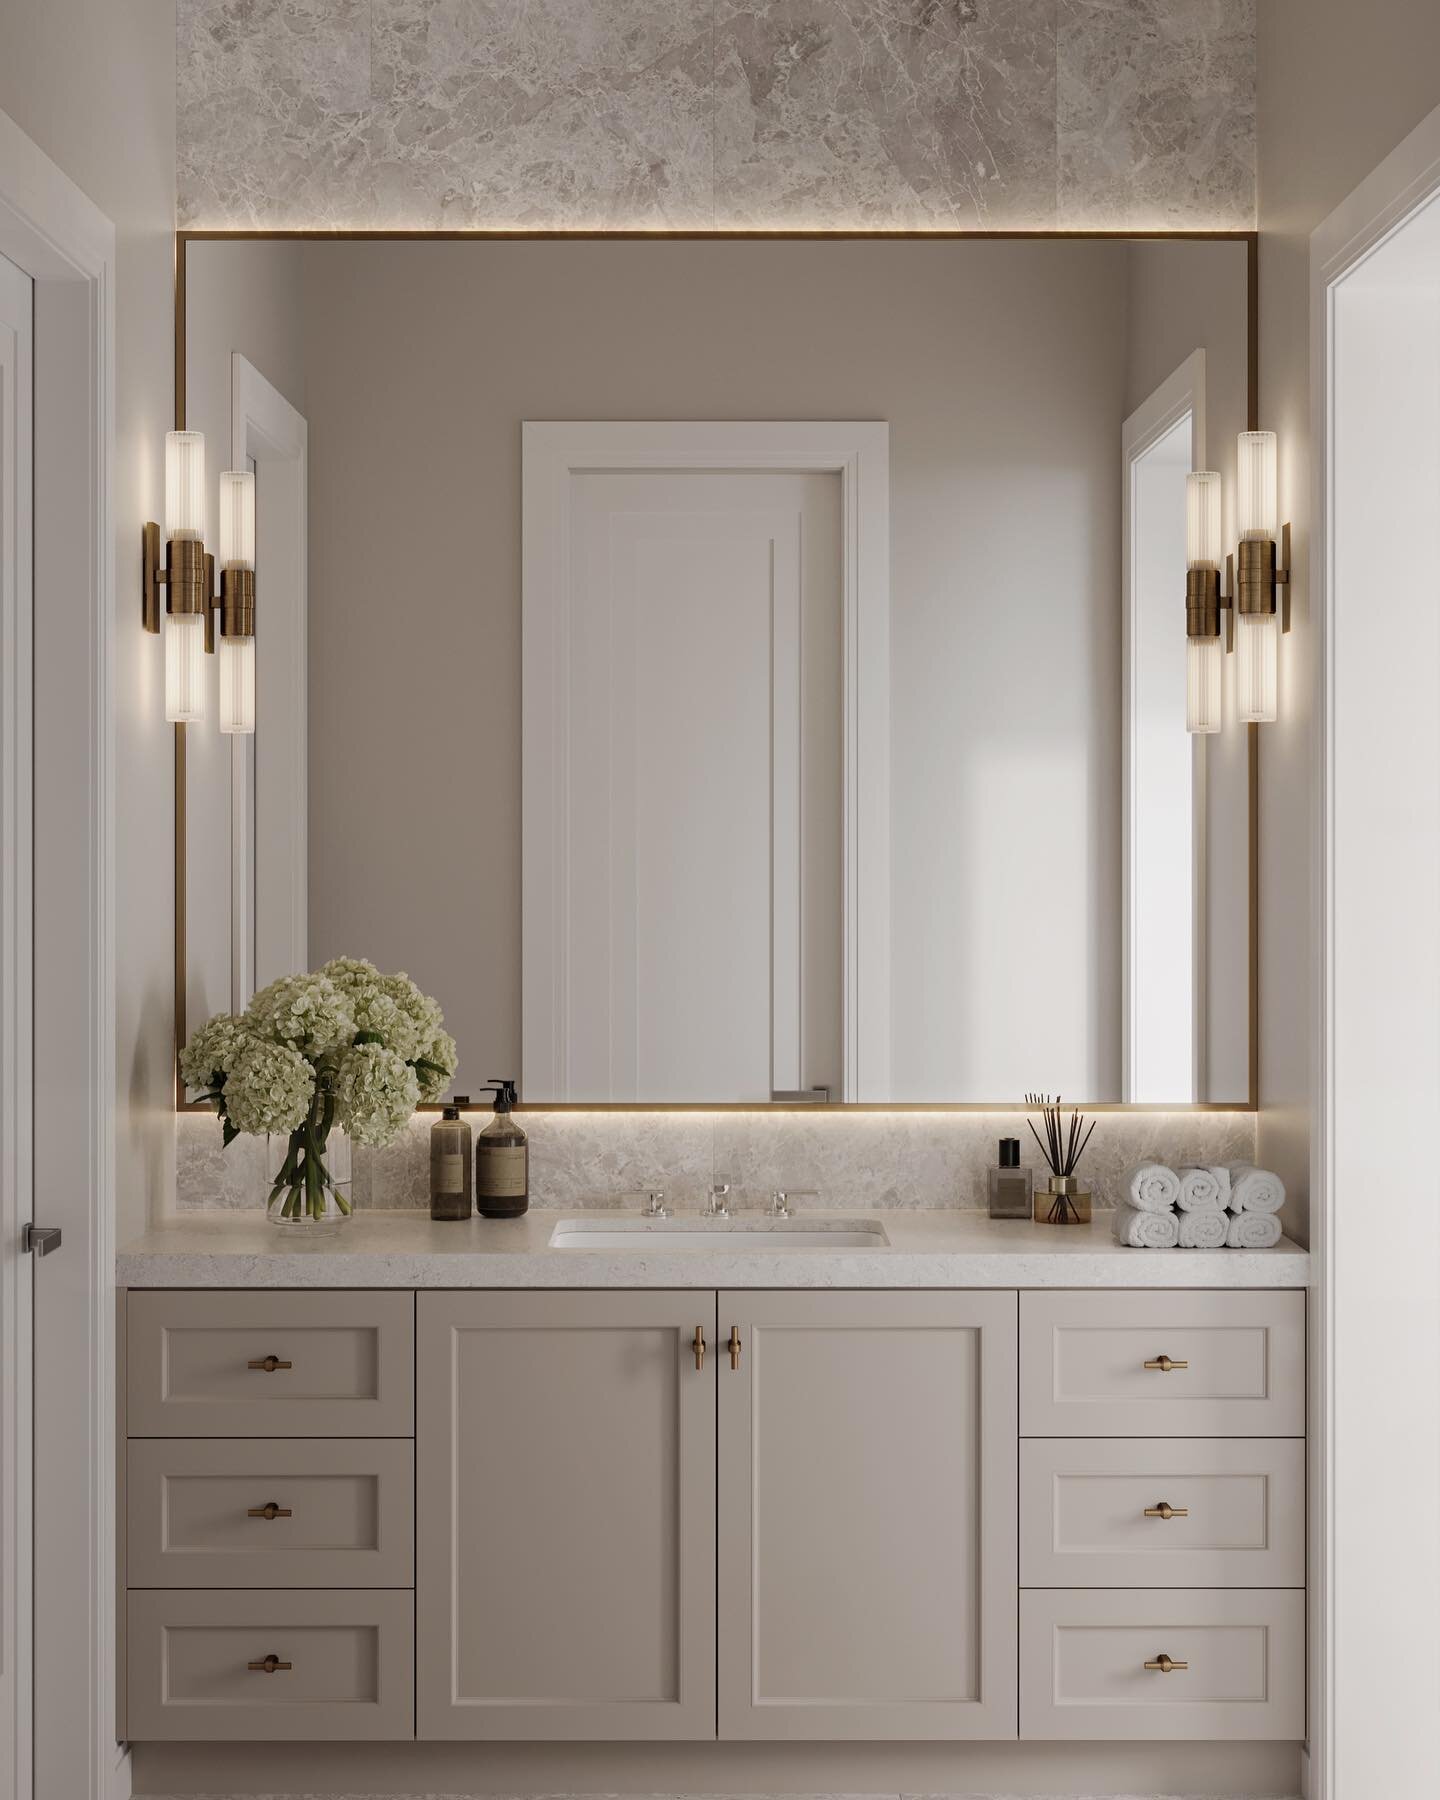 Guest bath at my project in #Irvine is getting a stunning refresh 🤩🤩
#beforeandafter 

Design @bluecanopydesign 
📸 Krystyna Lys

#design #luxuryhomes #luxe #home #interiordesign  #interiors #interiors #homestyle #homeinspo #housegoals #architect #